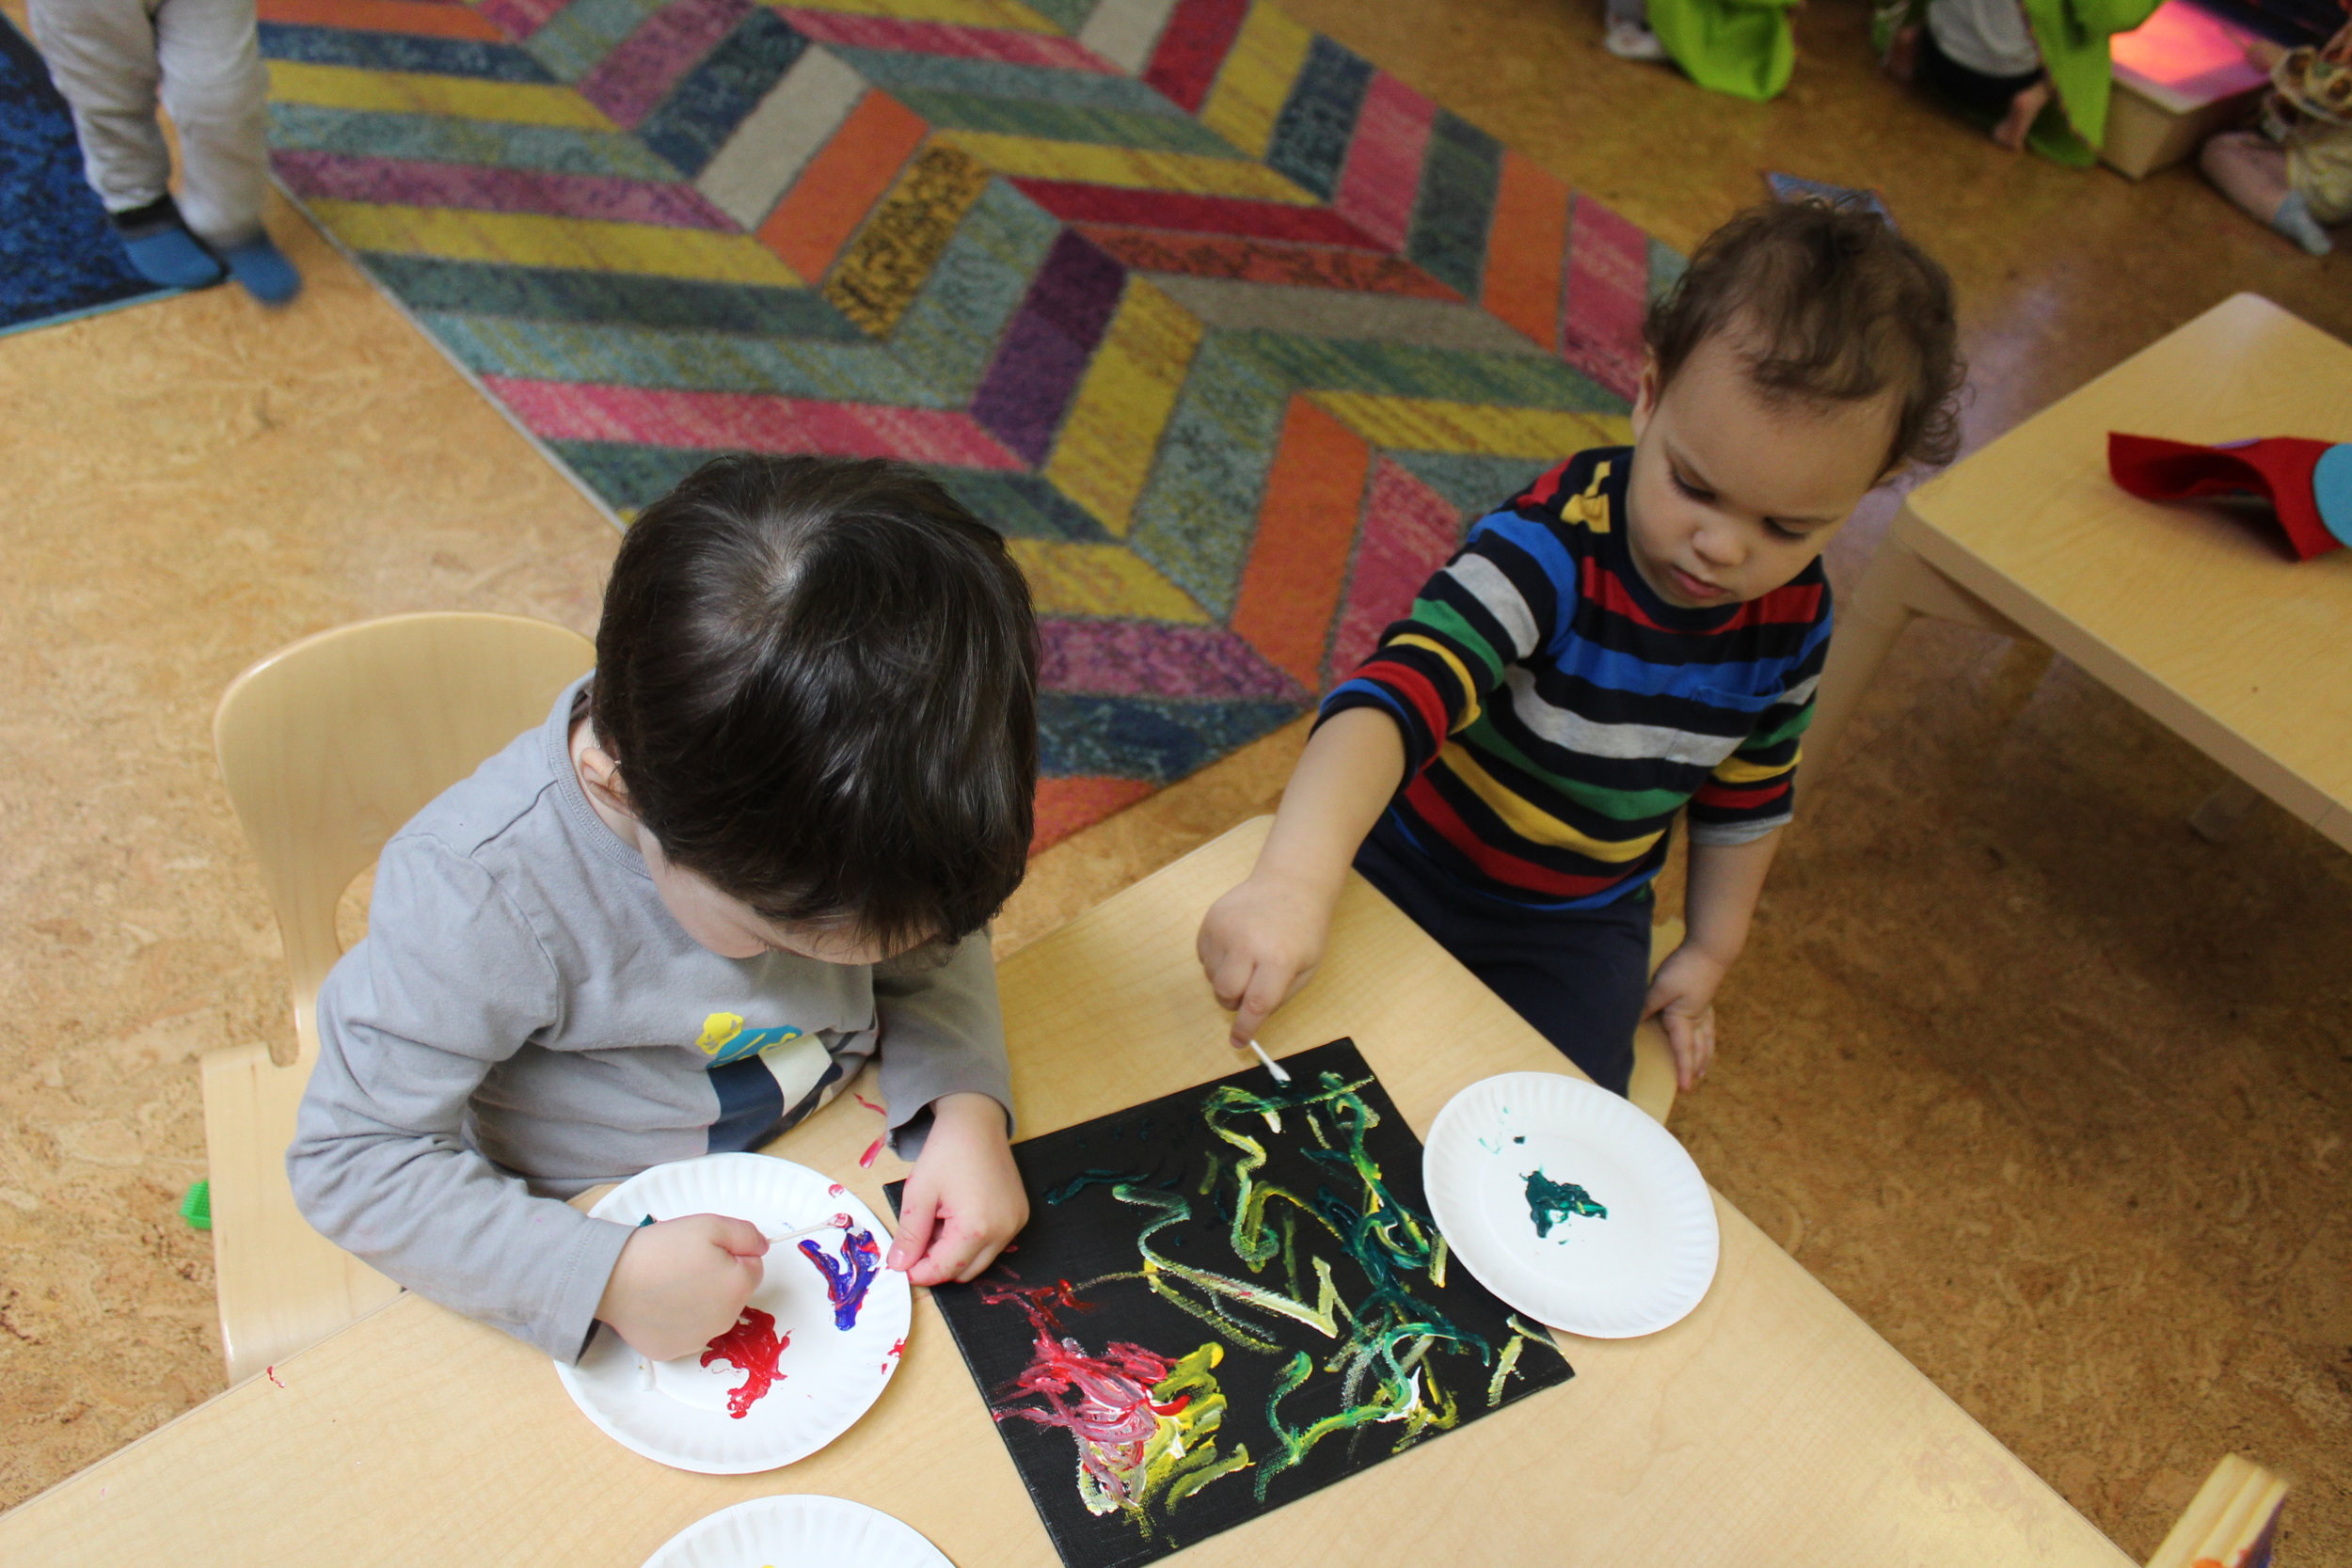  Painting with q-tips allows children to create distinctive lines on their art piece. It also promotes a different grip as they maneuver&nbsp;the q-tip.&nbsp;&nbsp;   